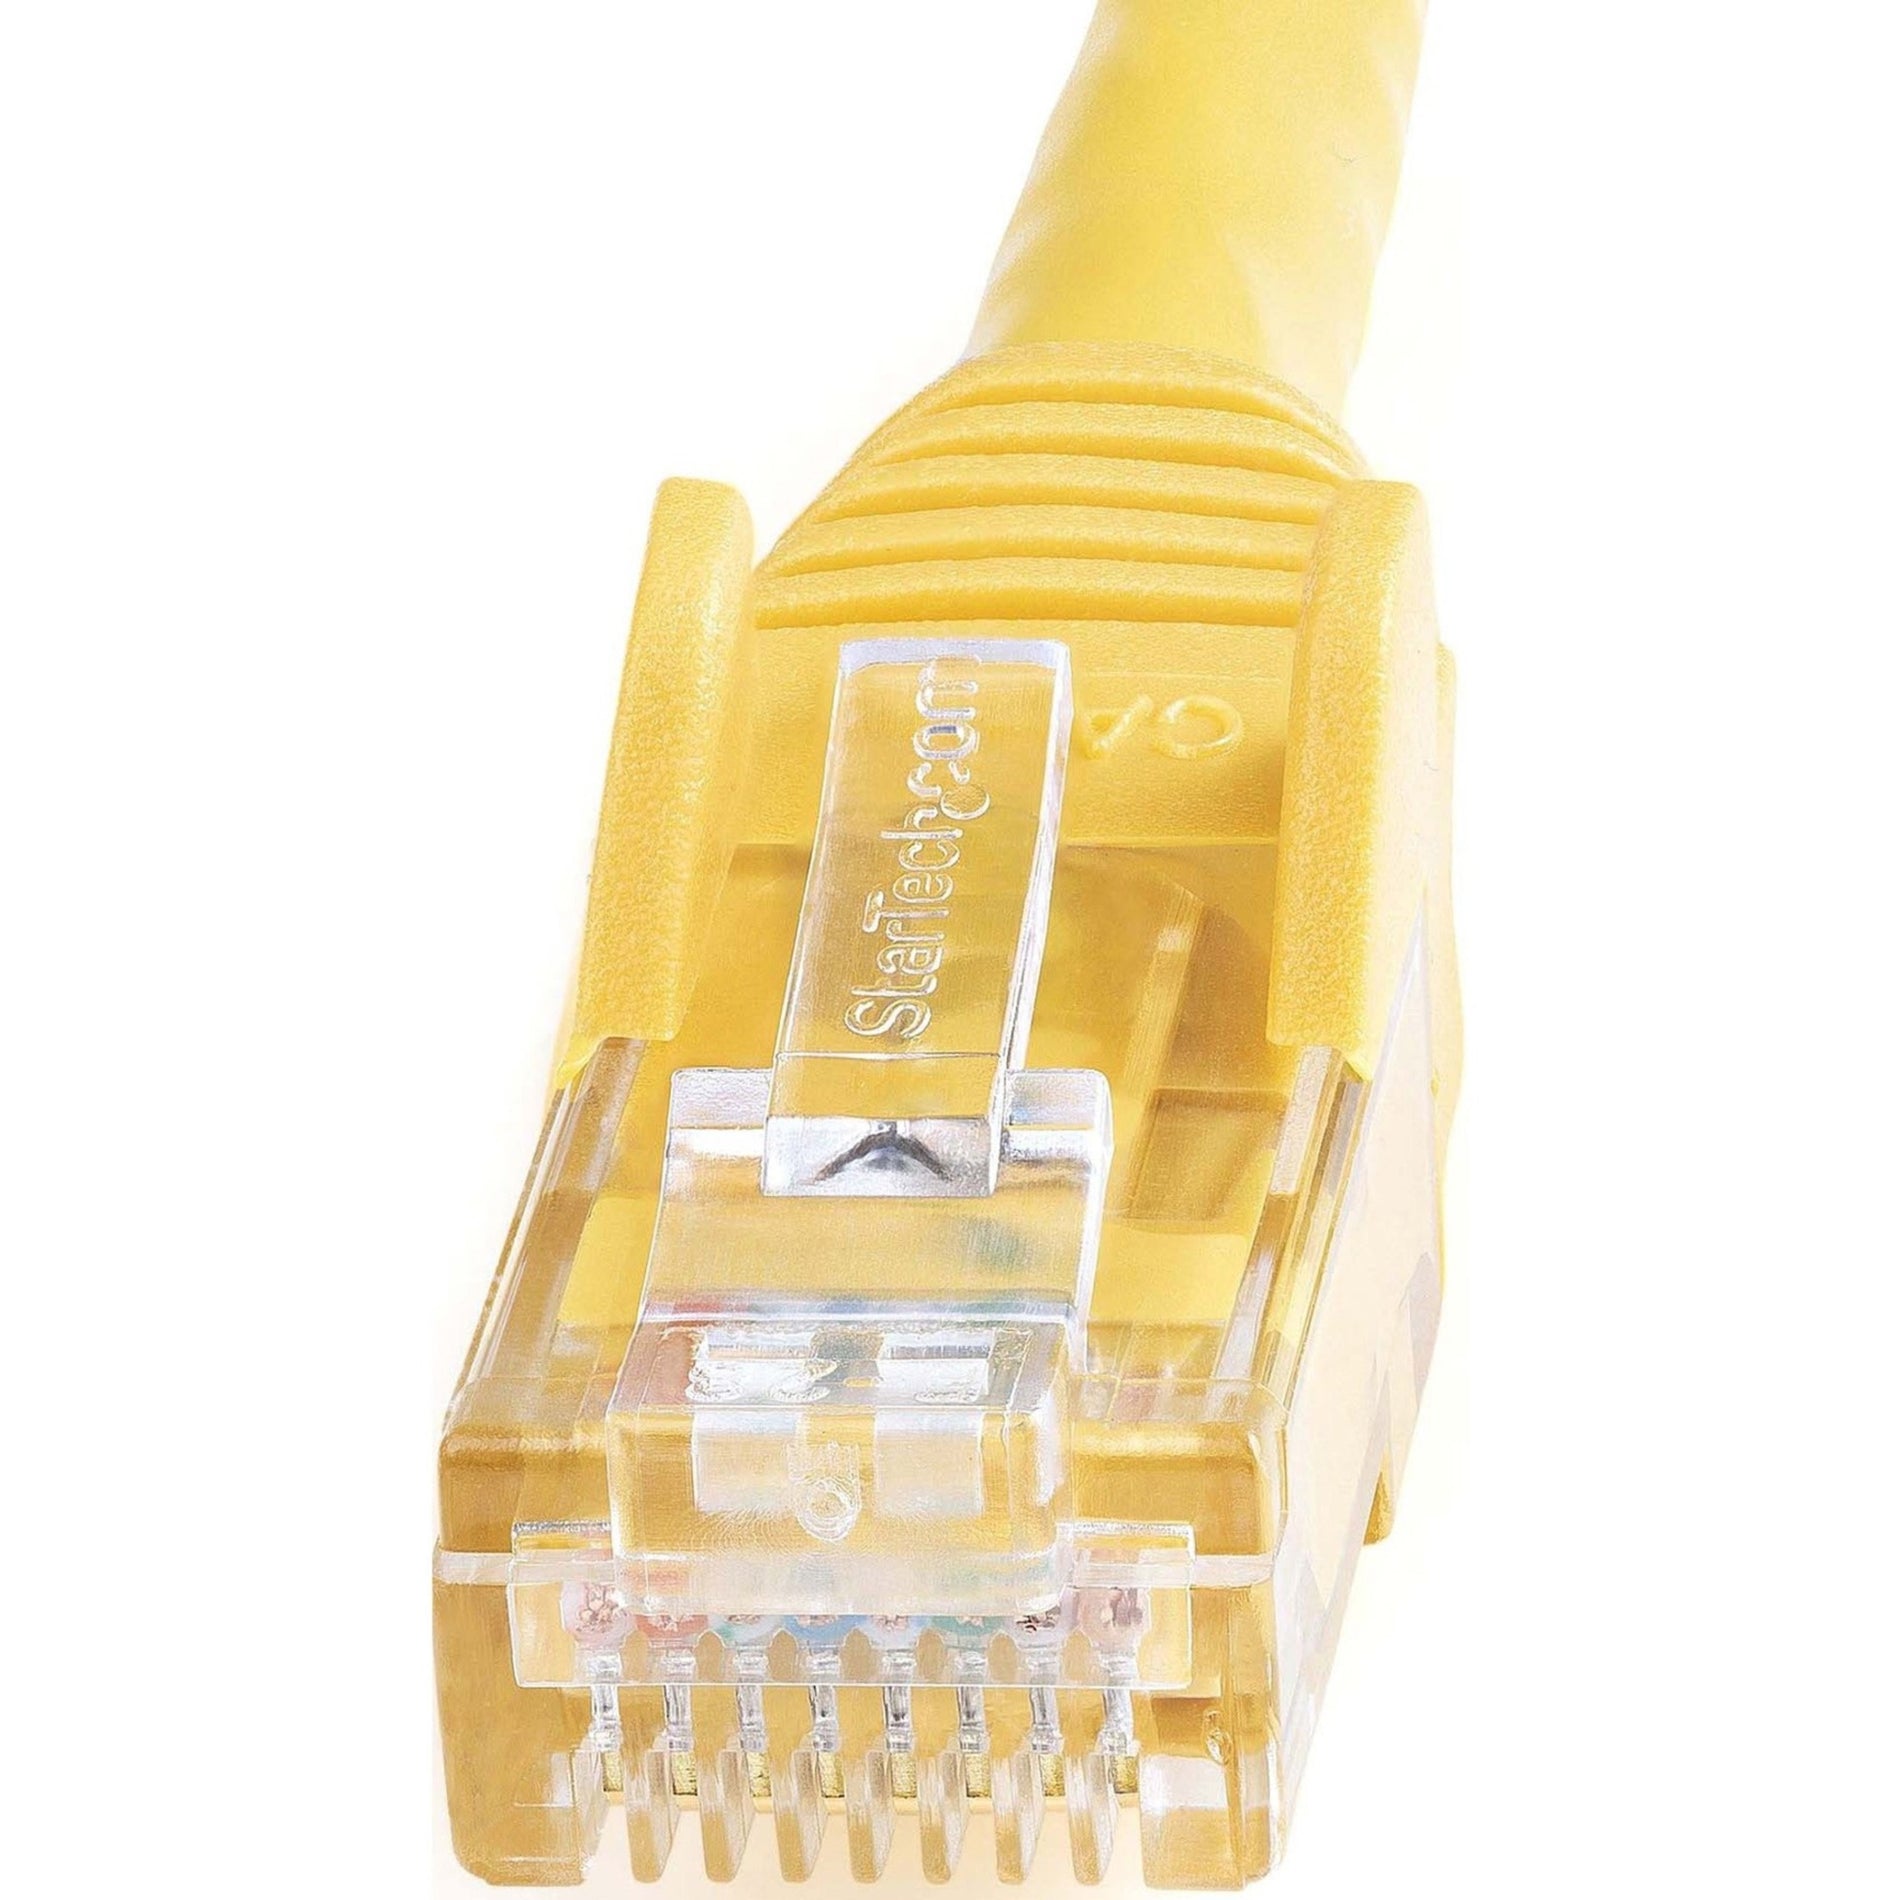 StarTech.com N6PATCH6YL Cat6 Patch Cable, 6 ft Yellow Ethernet Cable, Snagless RJ45 Connectors